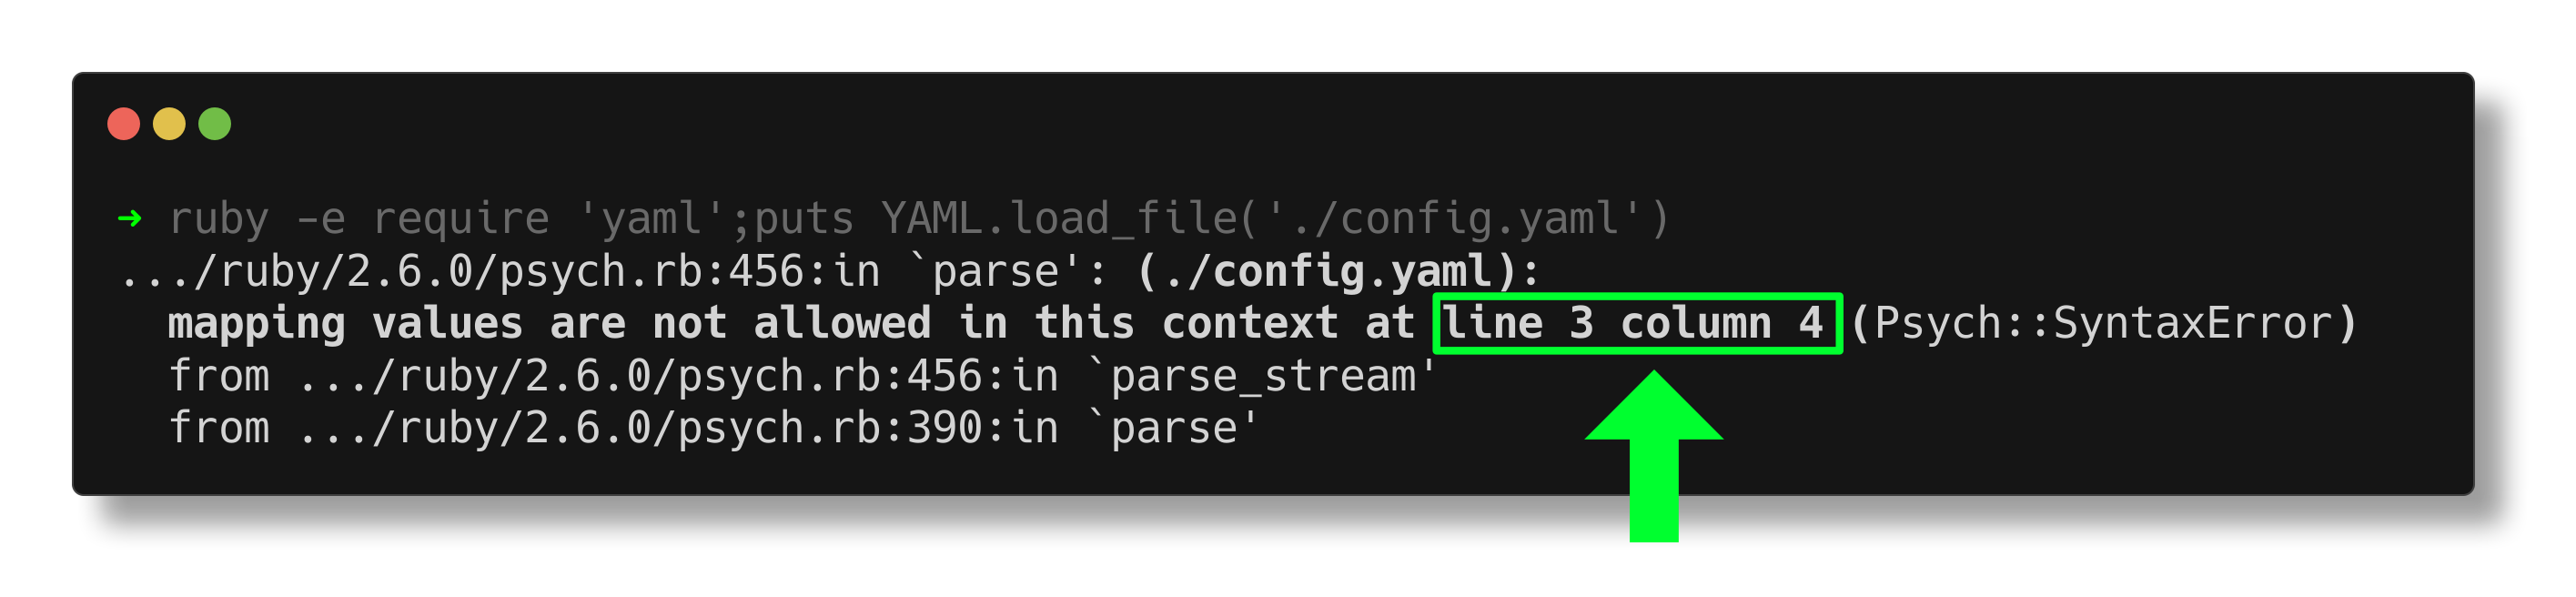 Validating for errors on yaml file line number containing the error